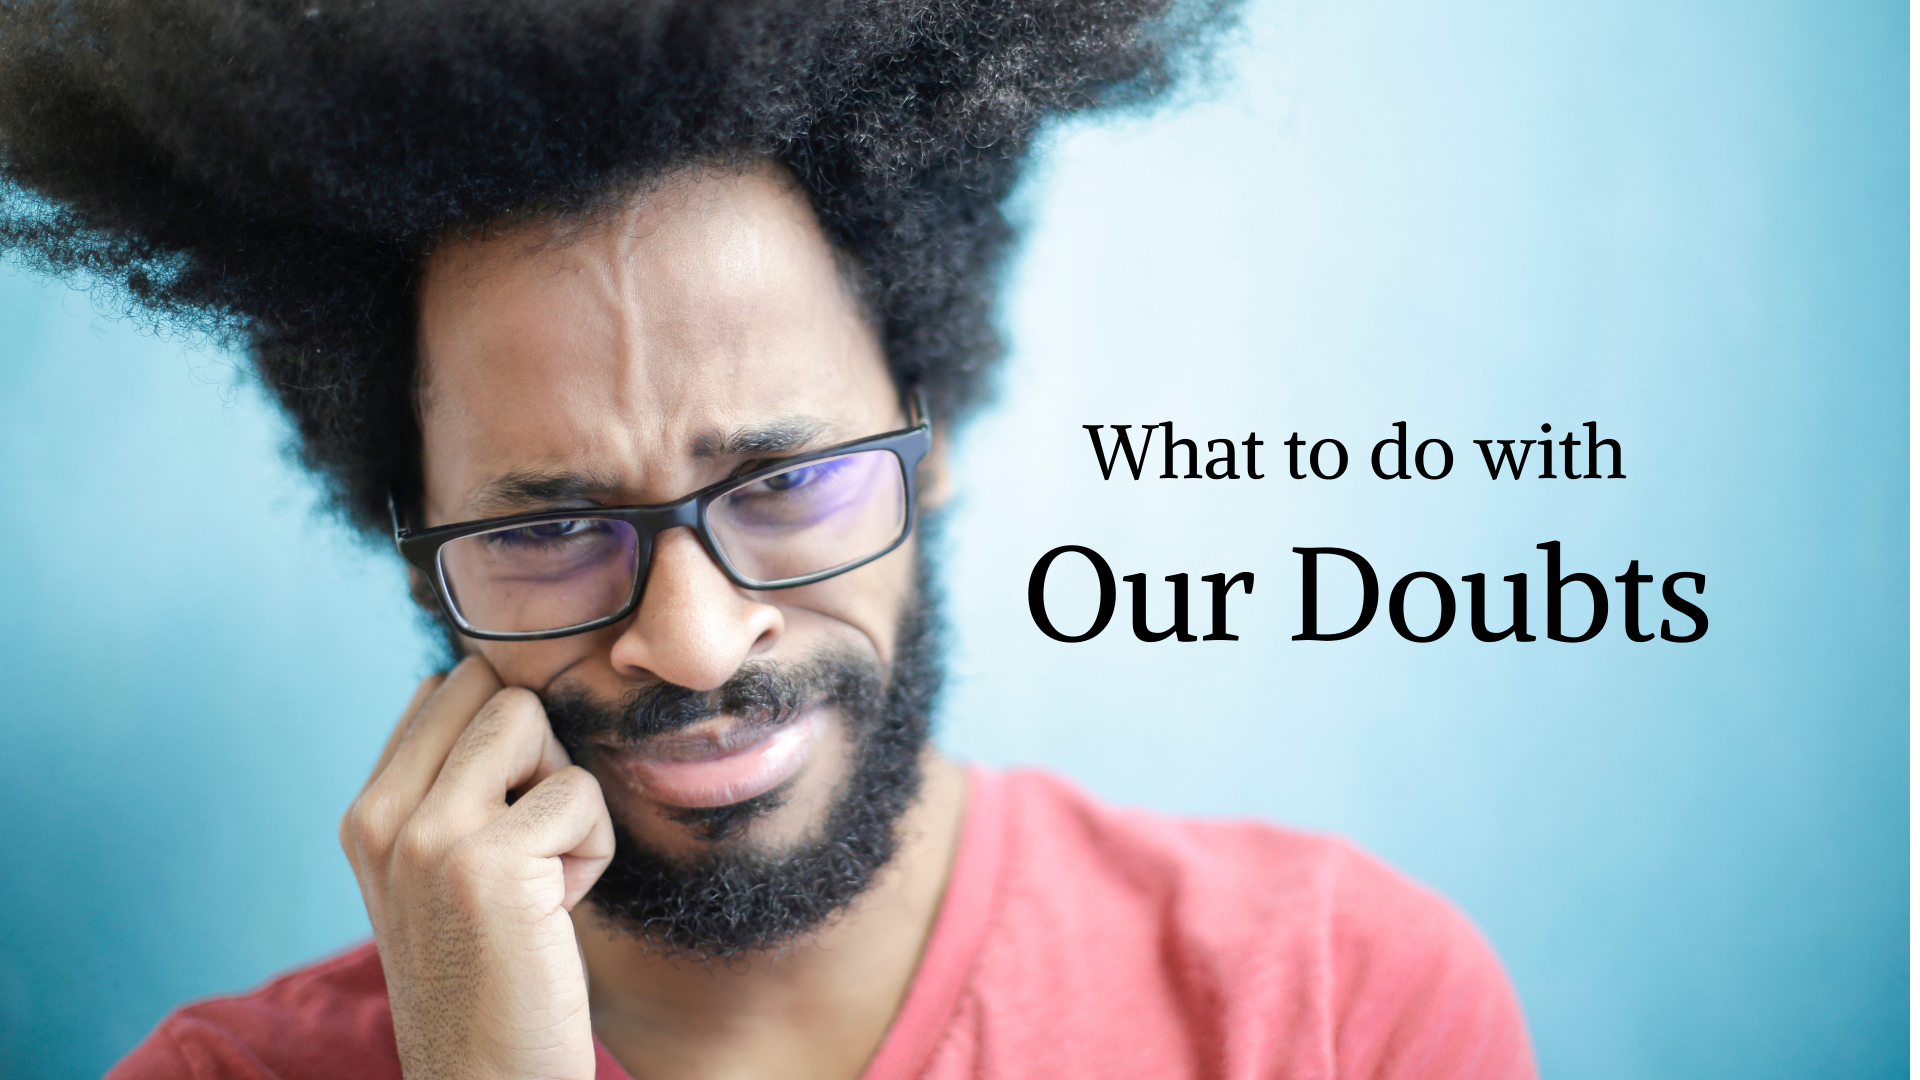 What to do with Our Doubts